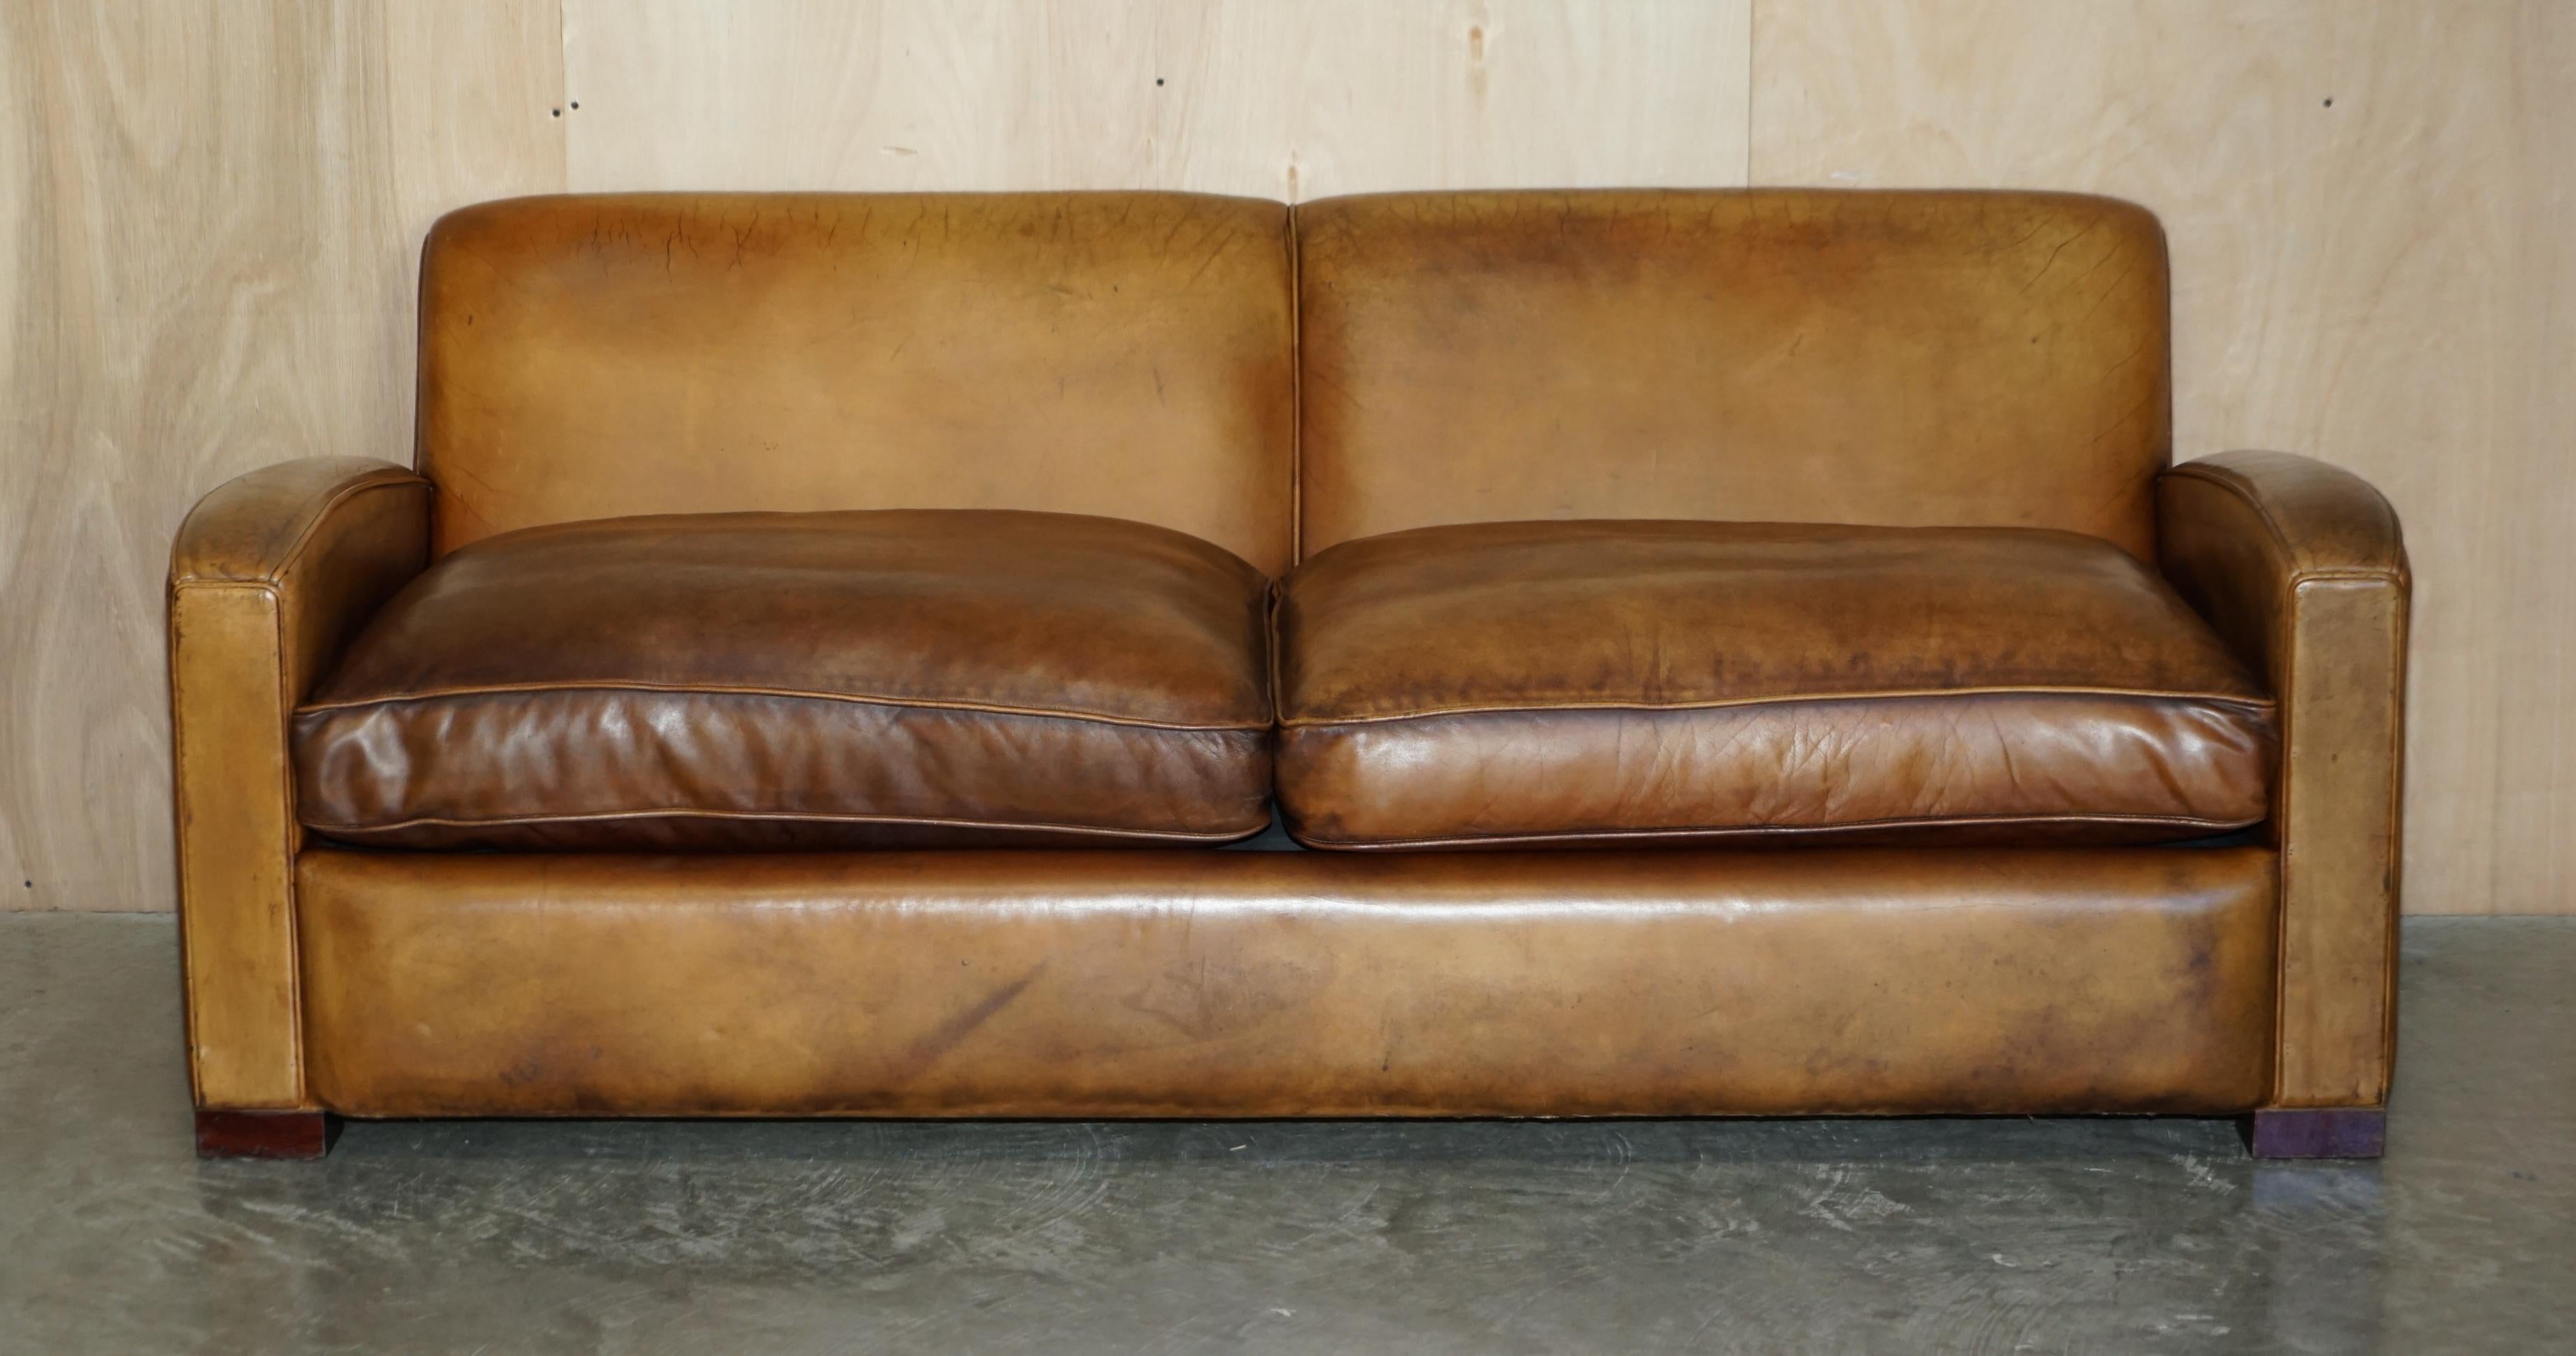 We are delighted to offer for sale this lovely vintage hand made in England Art Deco Odeon style brown leather sofa with overstuffed feather filled cushions

A good looking well made and decorative sofa, its upholstered with plain Scottish cattle